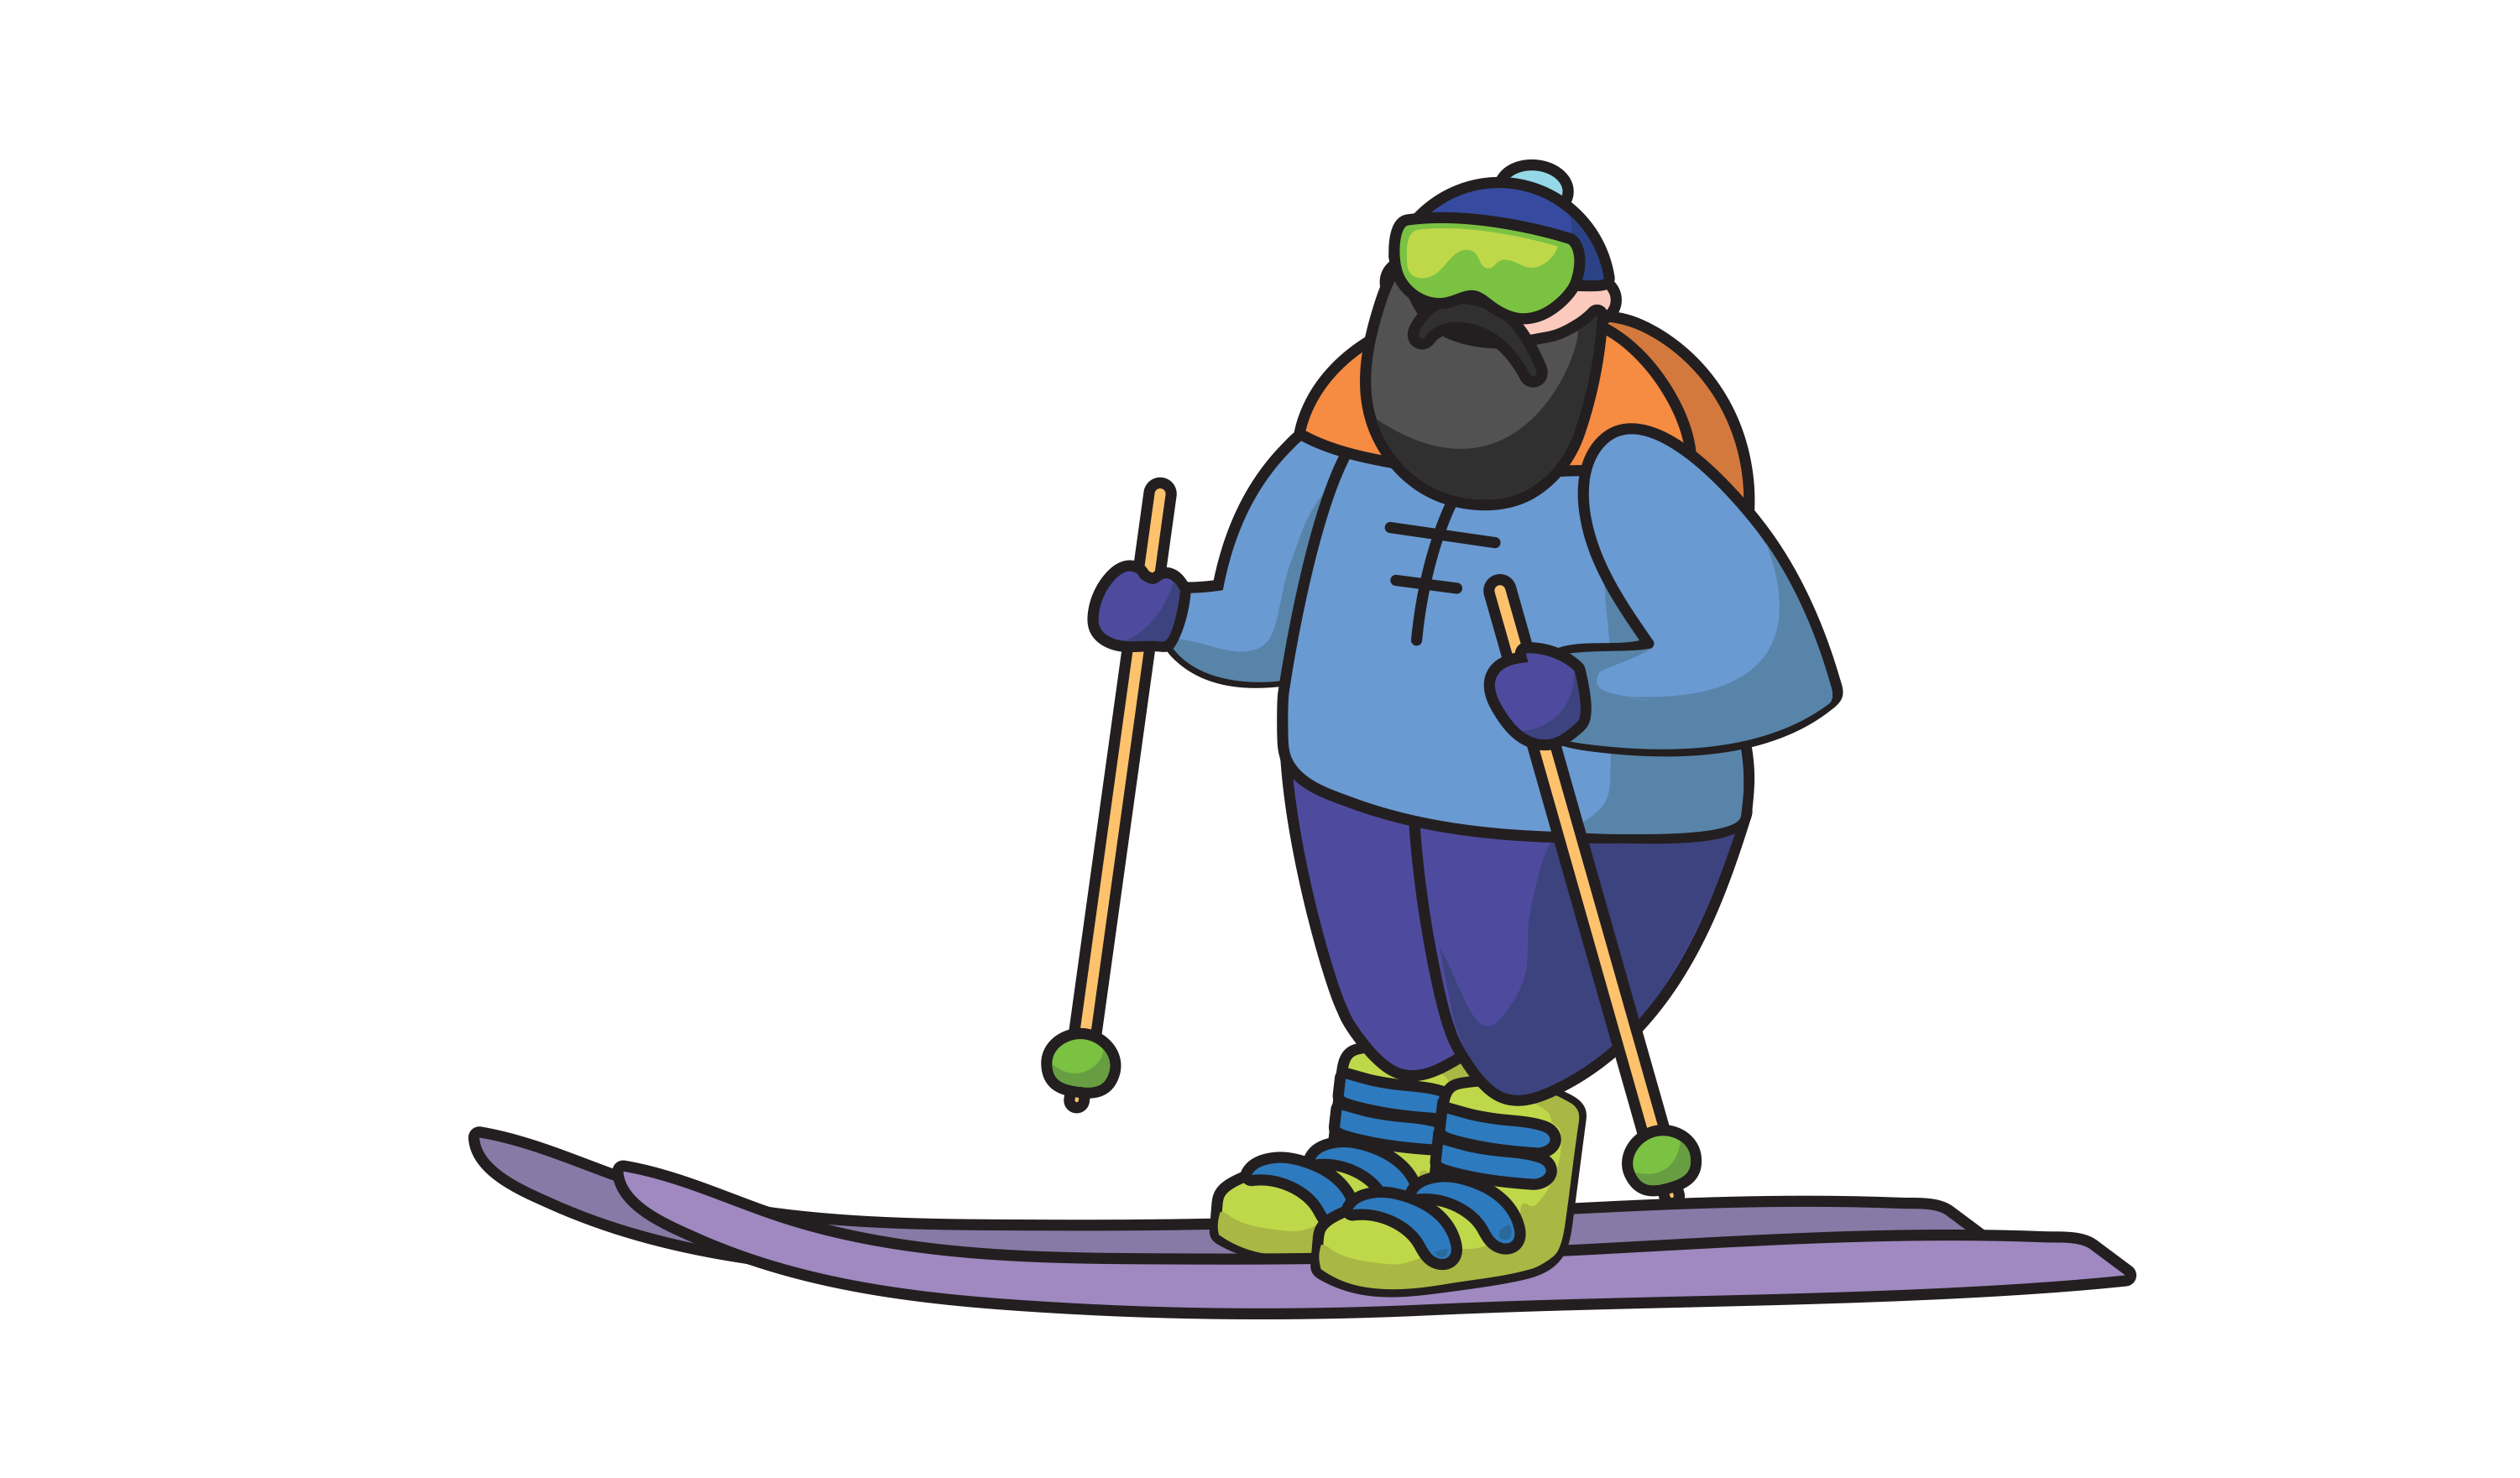 Illustration of a skier character.